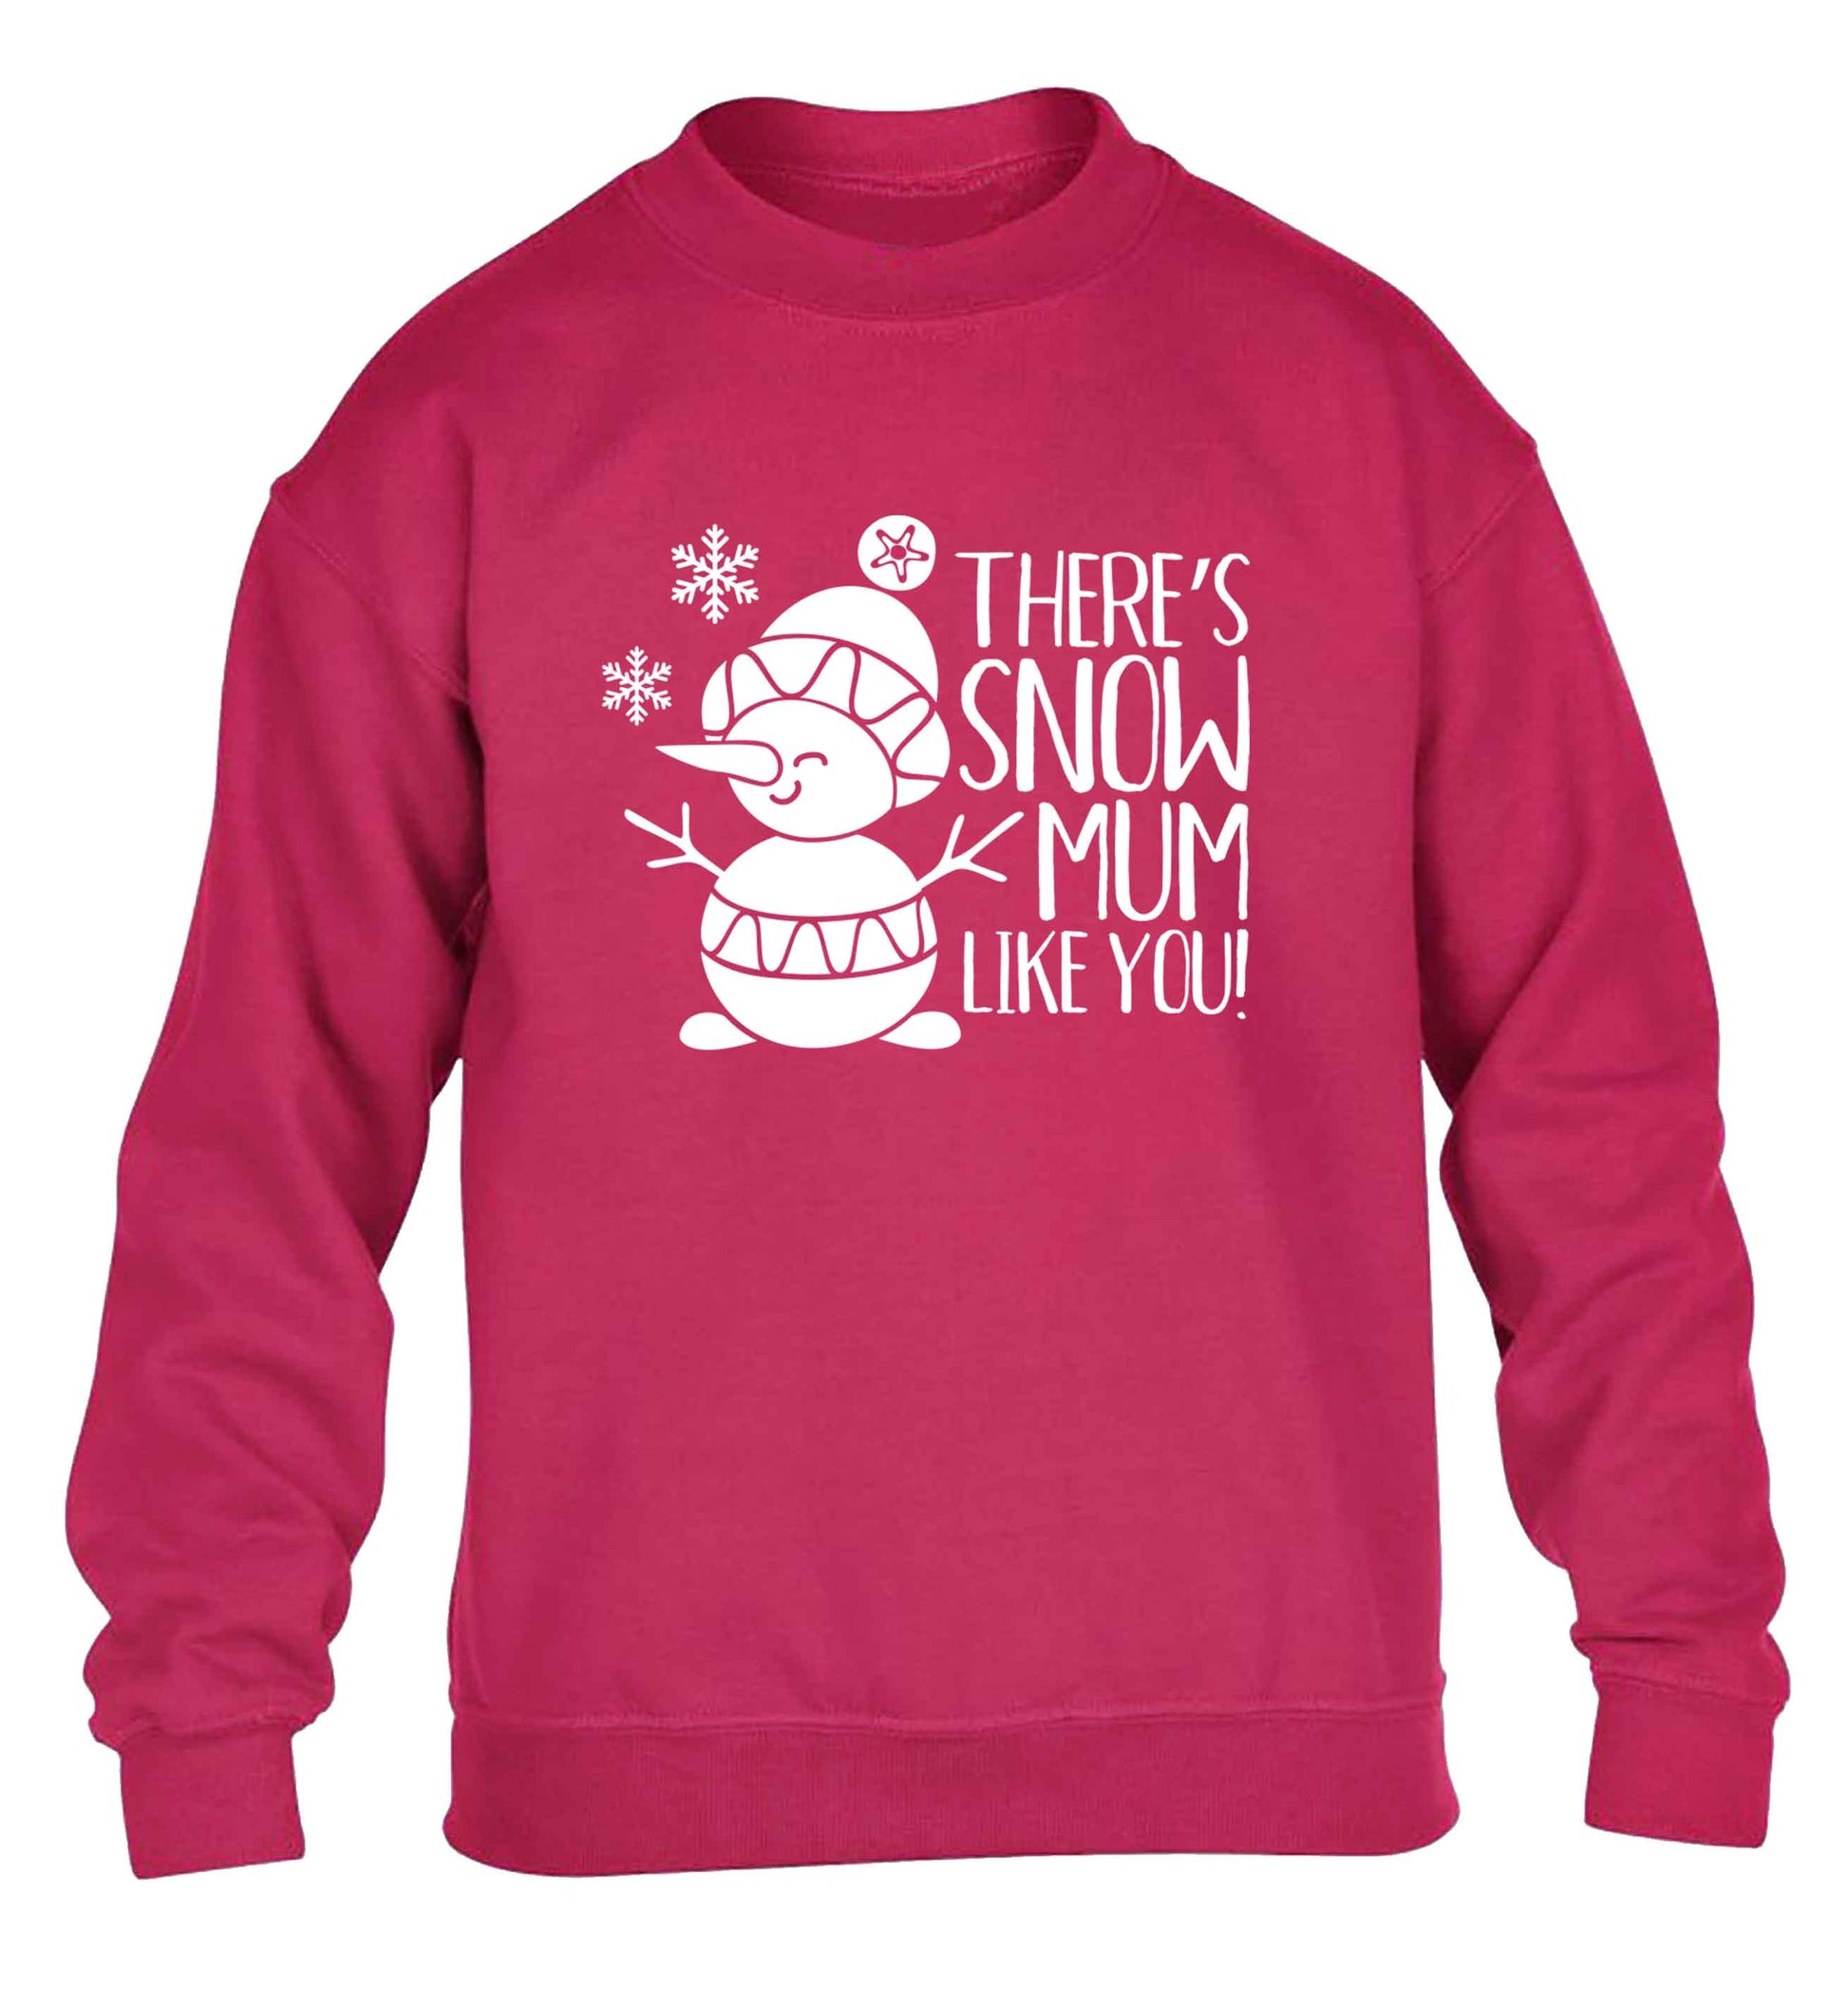 There's snow mum like you children's pink sweater 12-13 Years